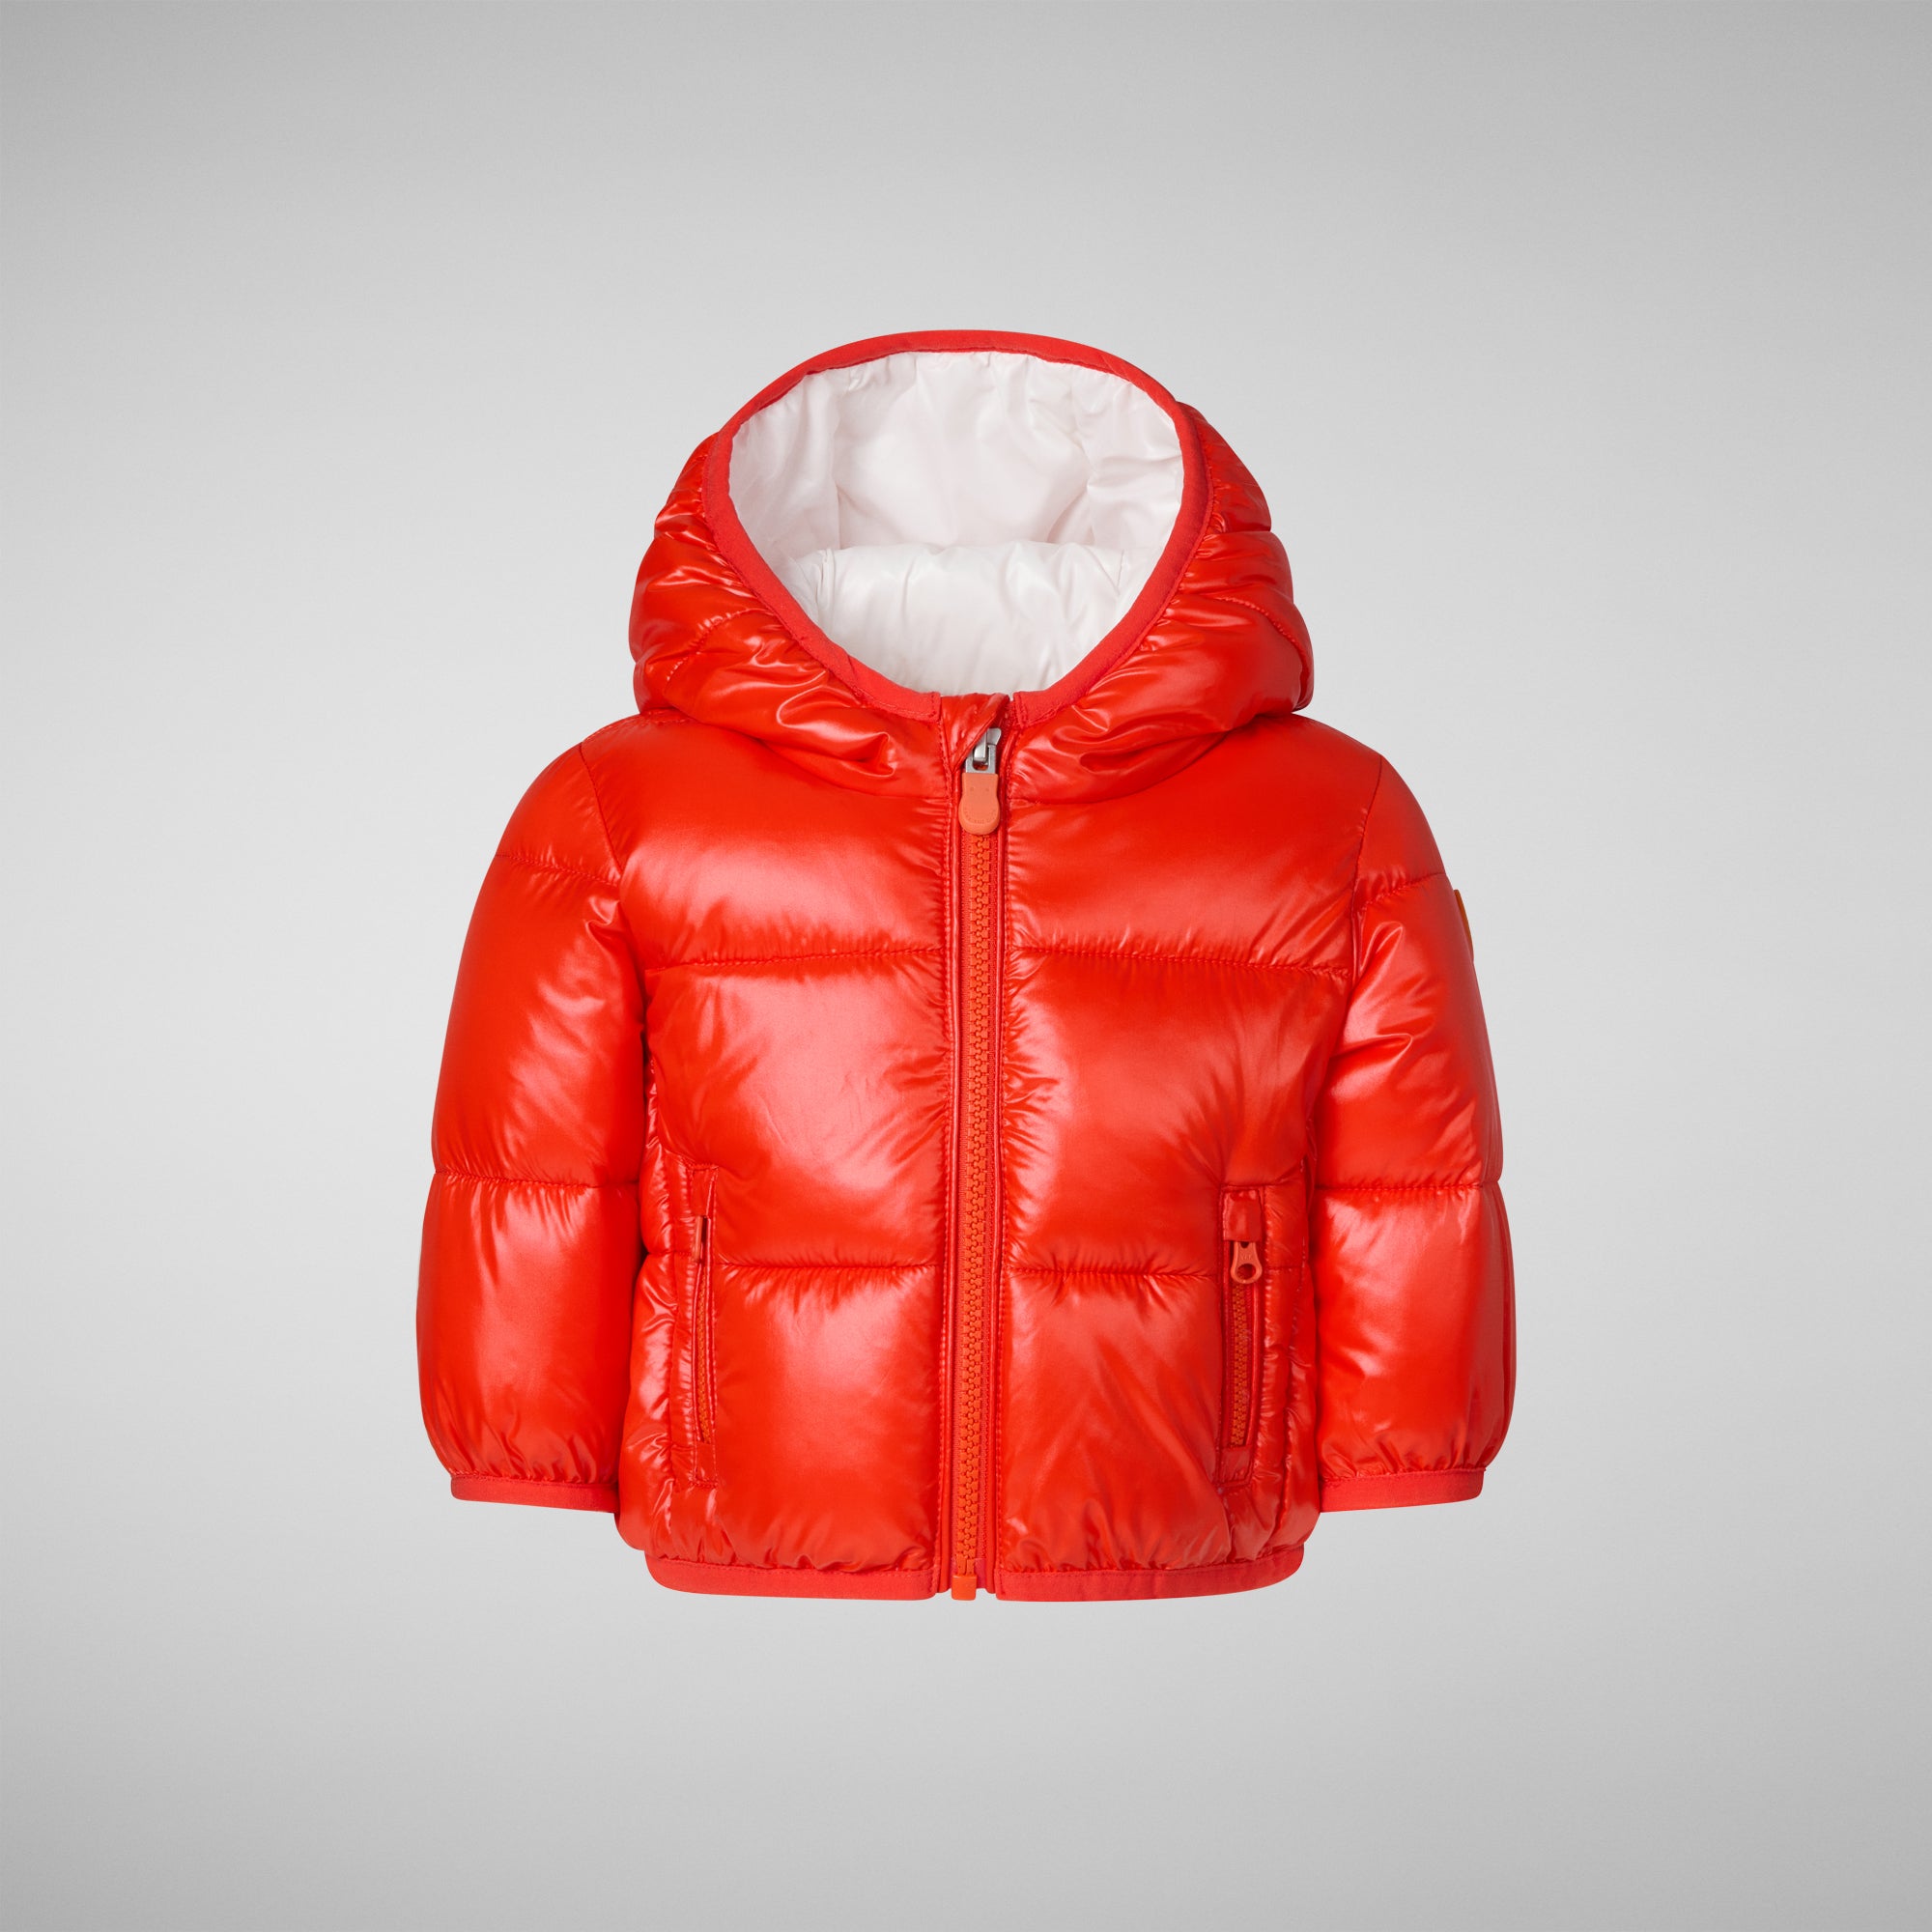 Babies' animal free hooded puffer jacket Jody in poppy red - Save